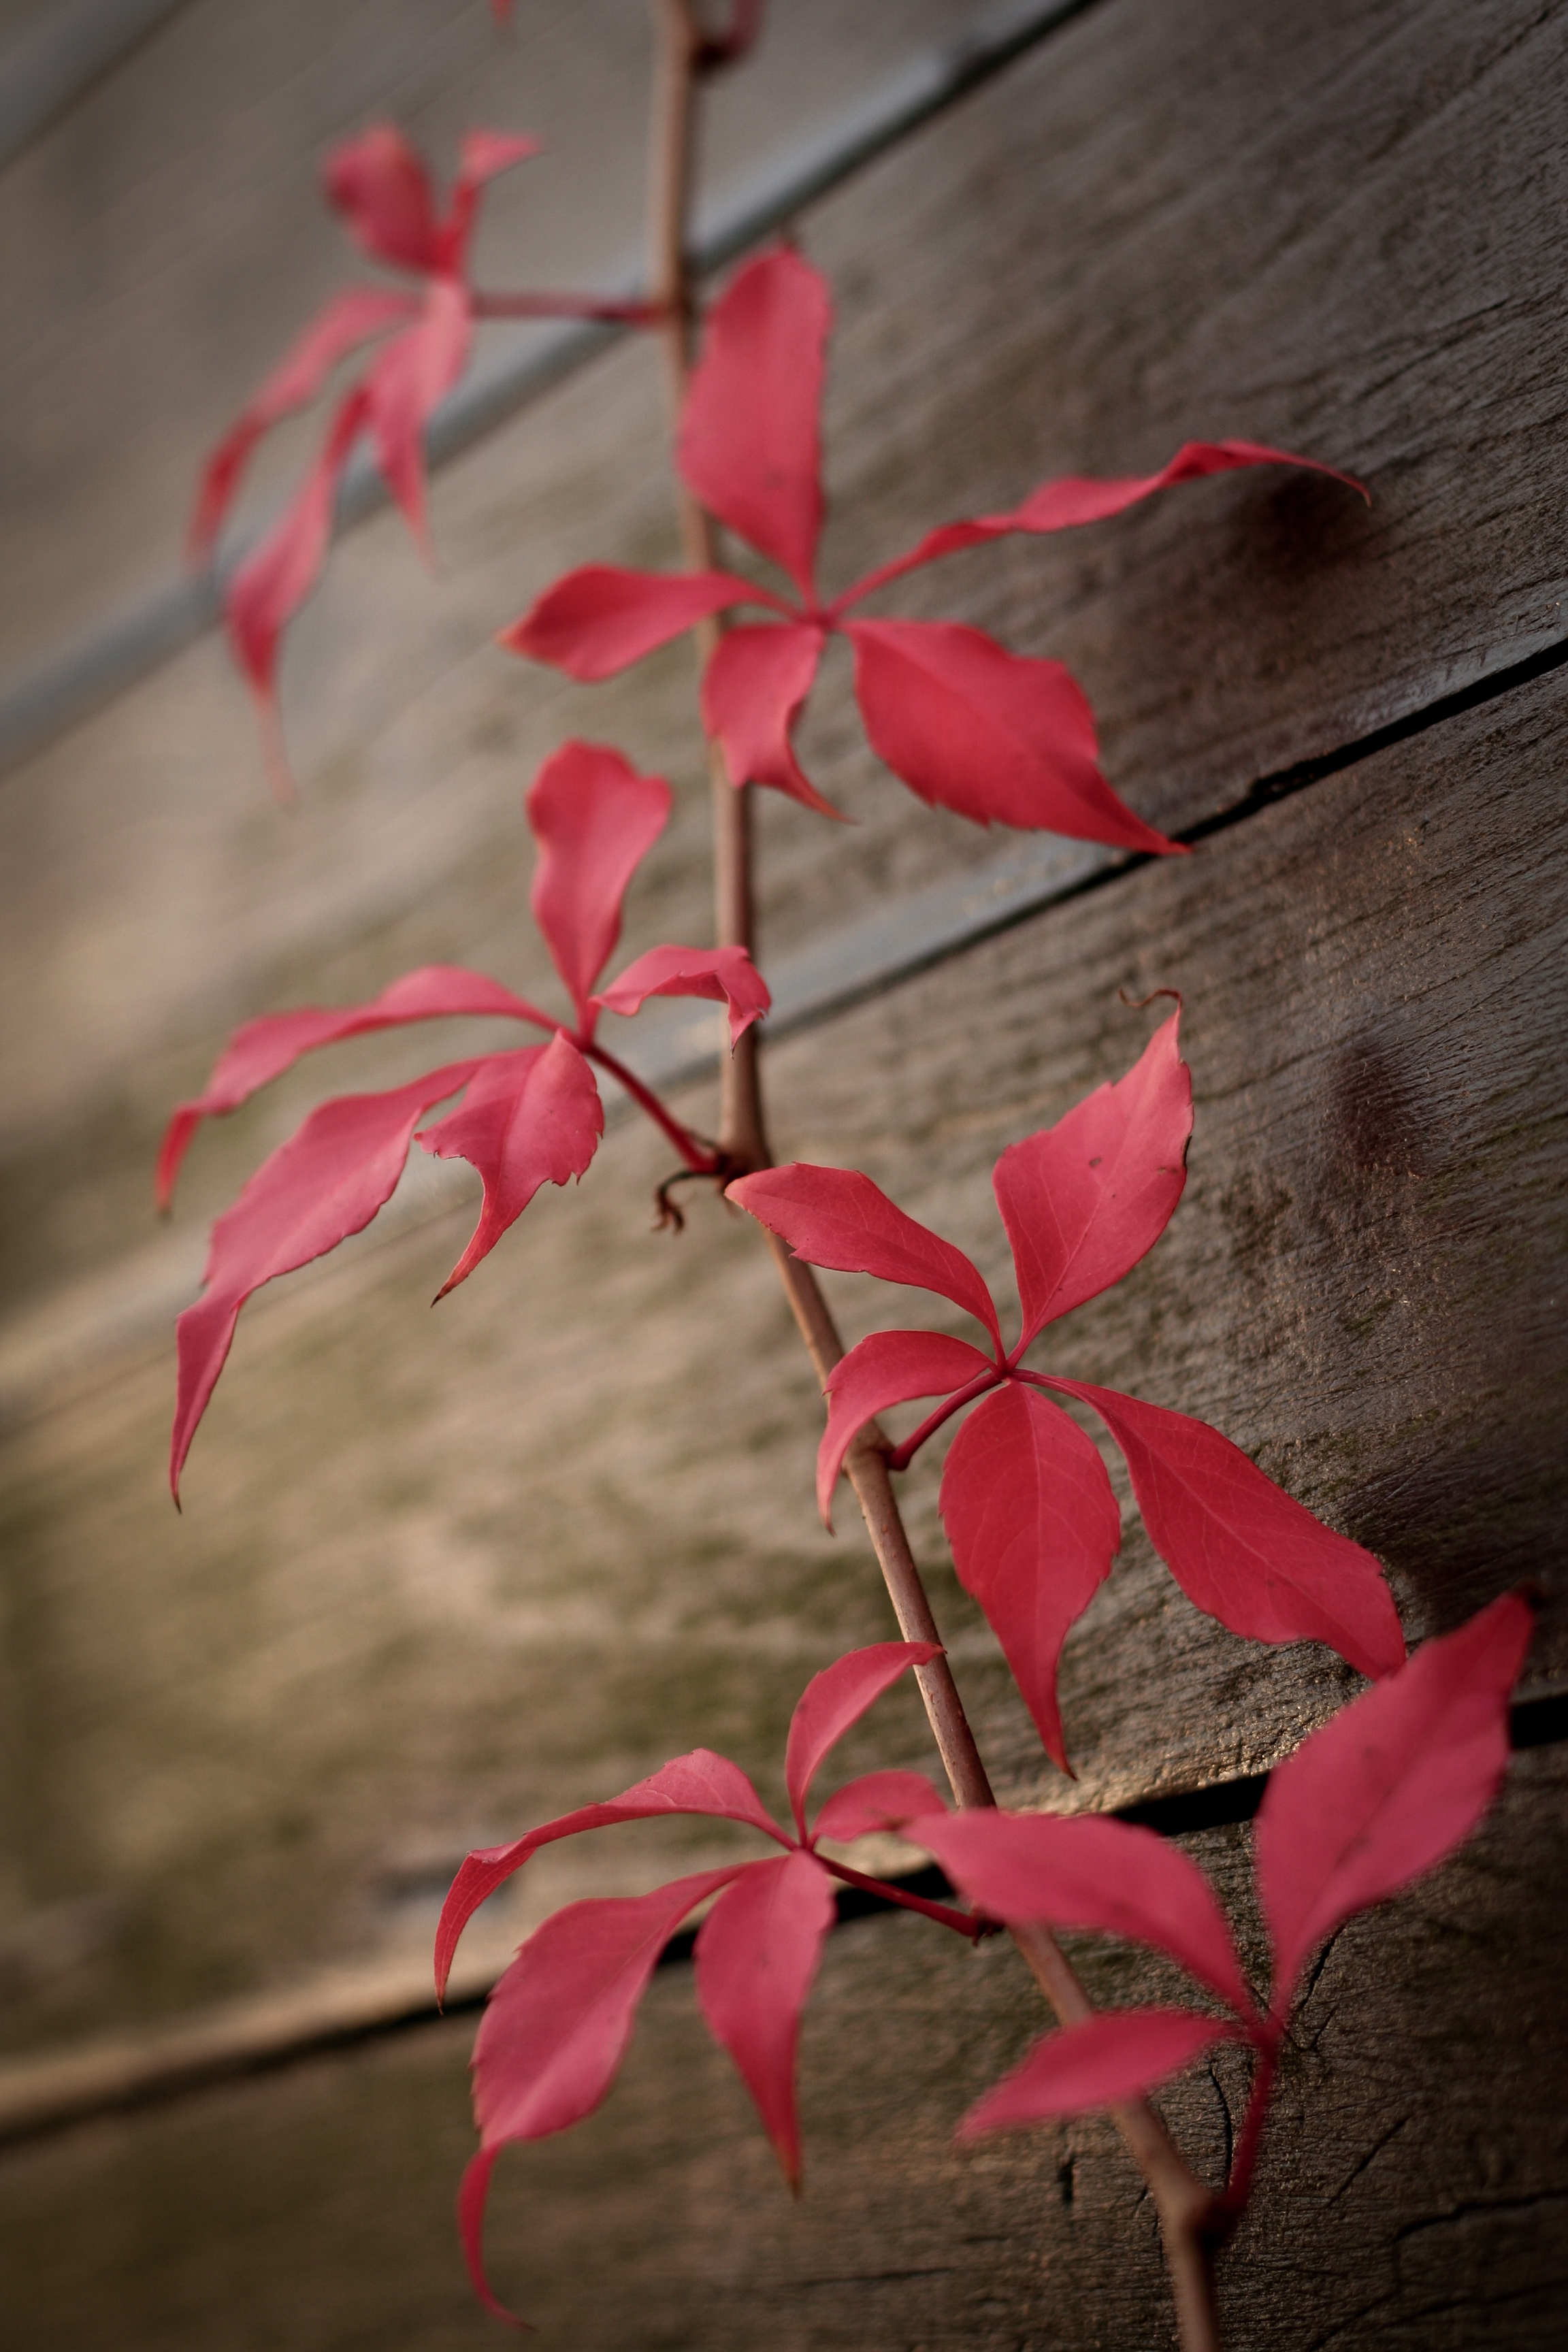 Free HD miscellaneous, red, leaves, plant, miscellanea, ivy